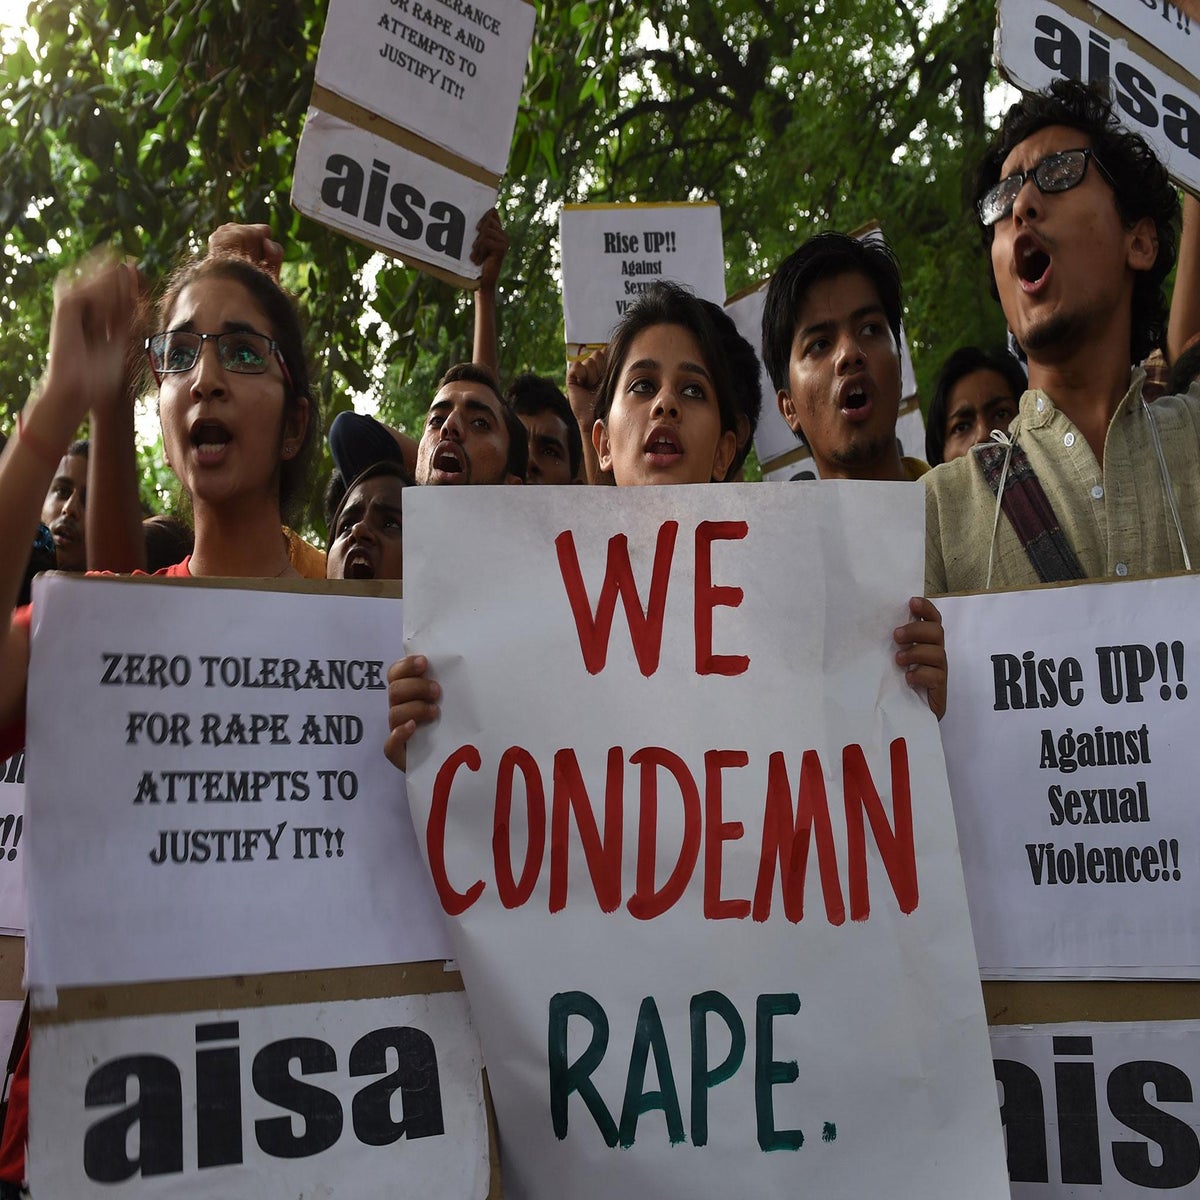 Forest Rape In Indian Movie - Gang rape' of student prompts arrests after video causes outcry in India |  The Independent | The Independent